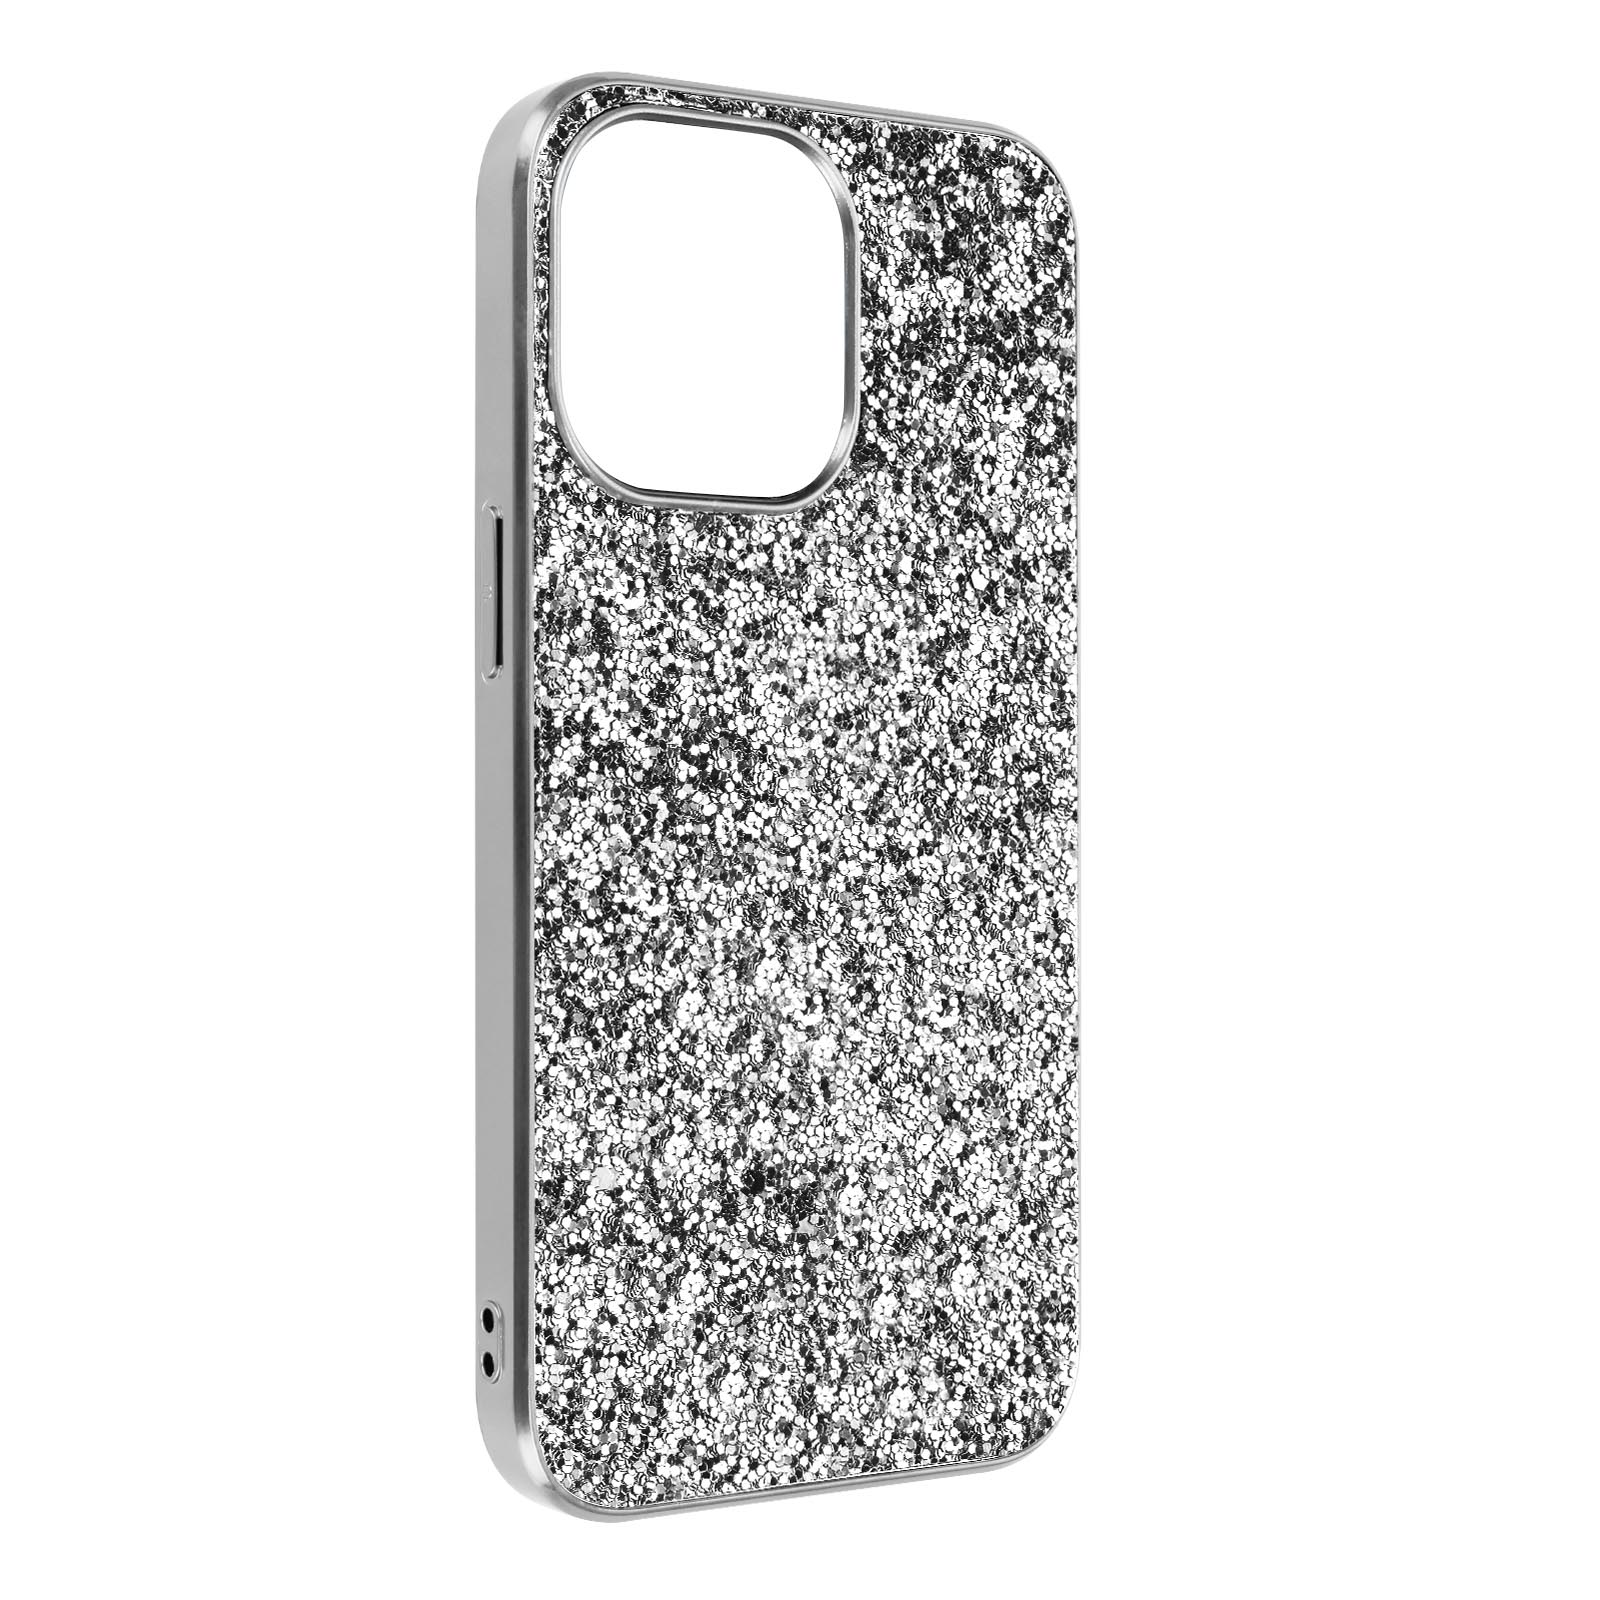 Series, Apple, iPhone Pro 13 Max, Silber Backcover, Powder AVIZAR